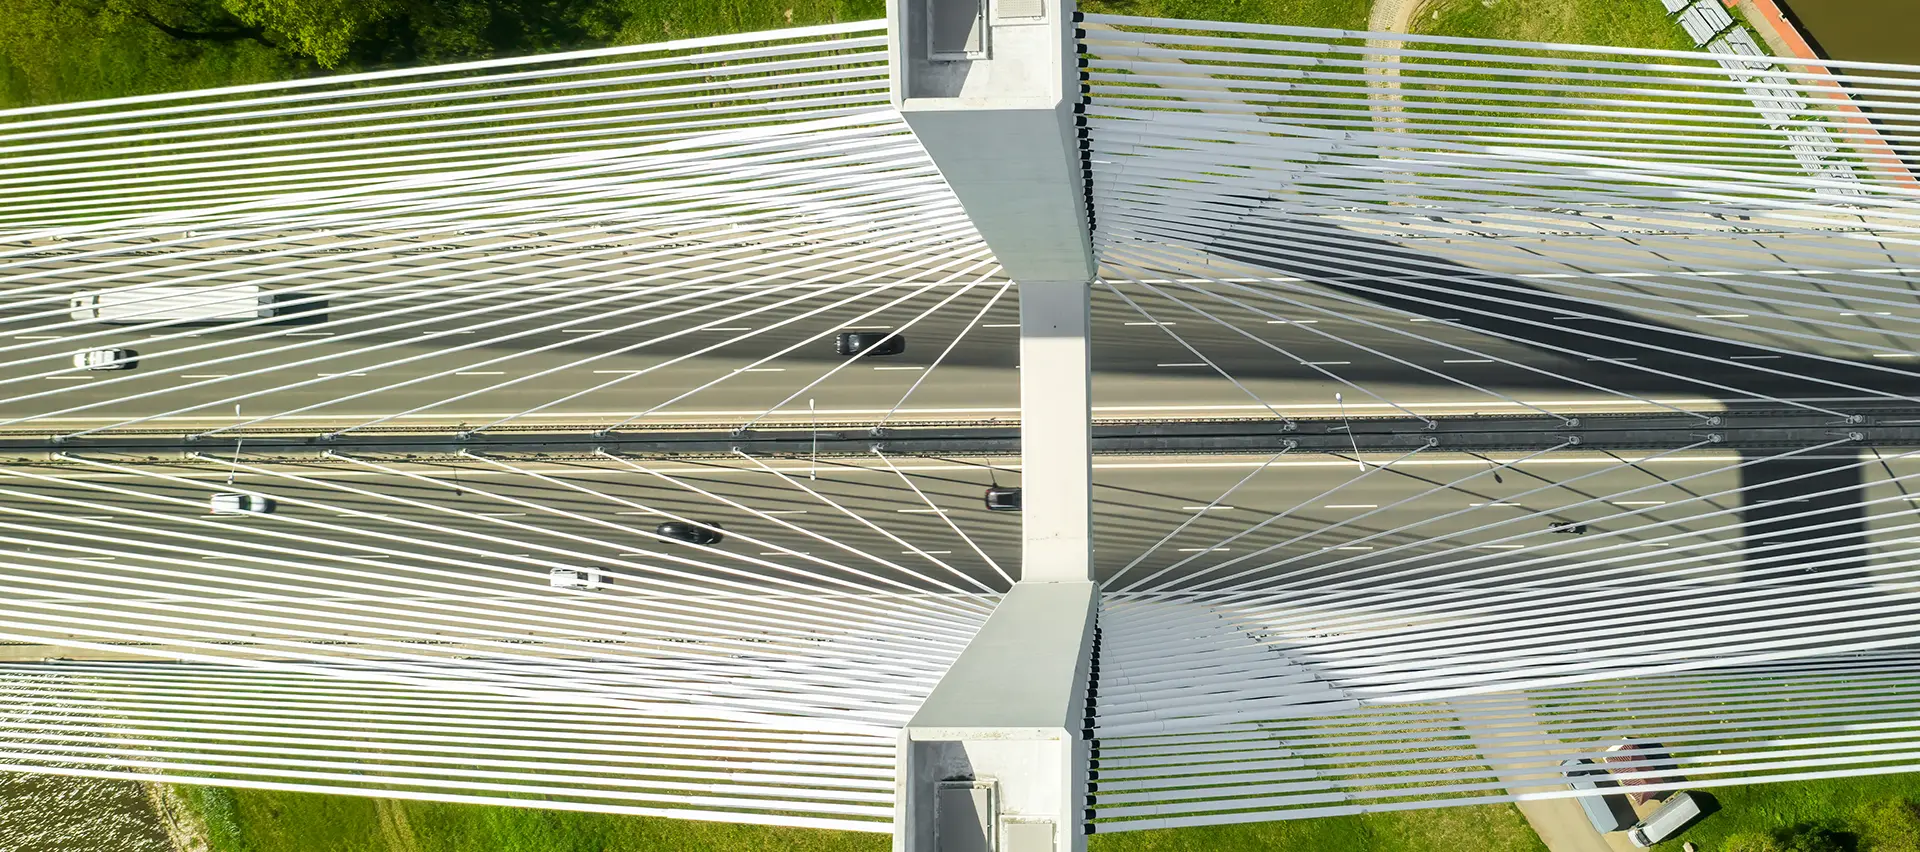 A birds-eye view of a bridge with several cars crossing, showing the complexity of structural engineering and the importance of reliable connections.